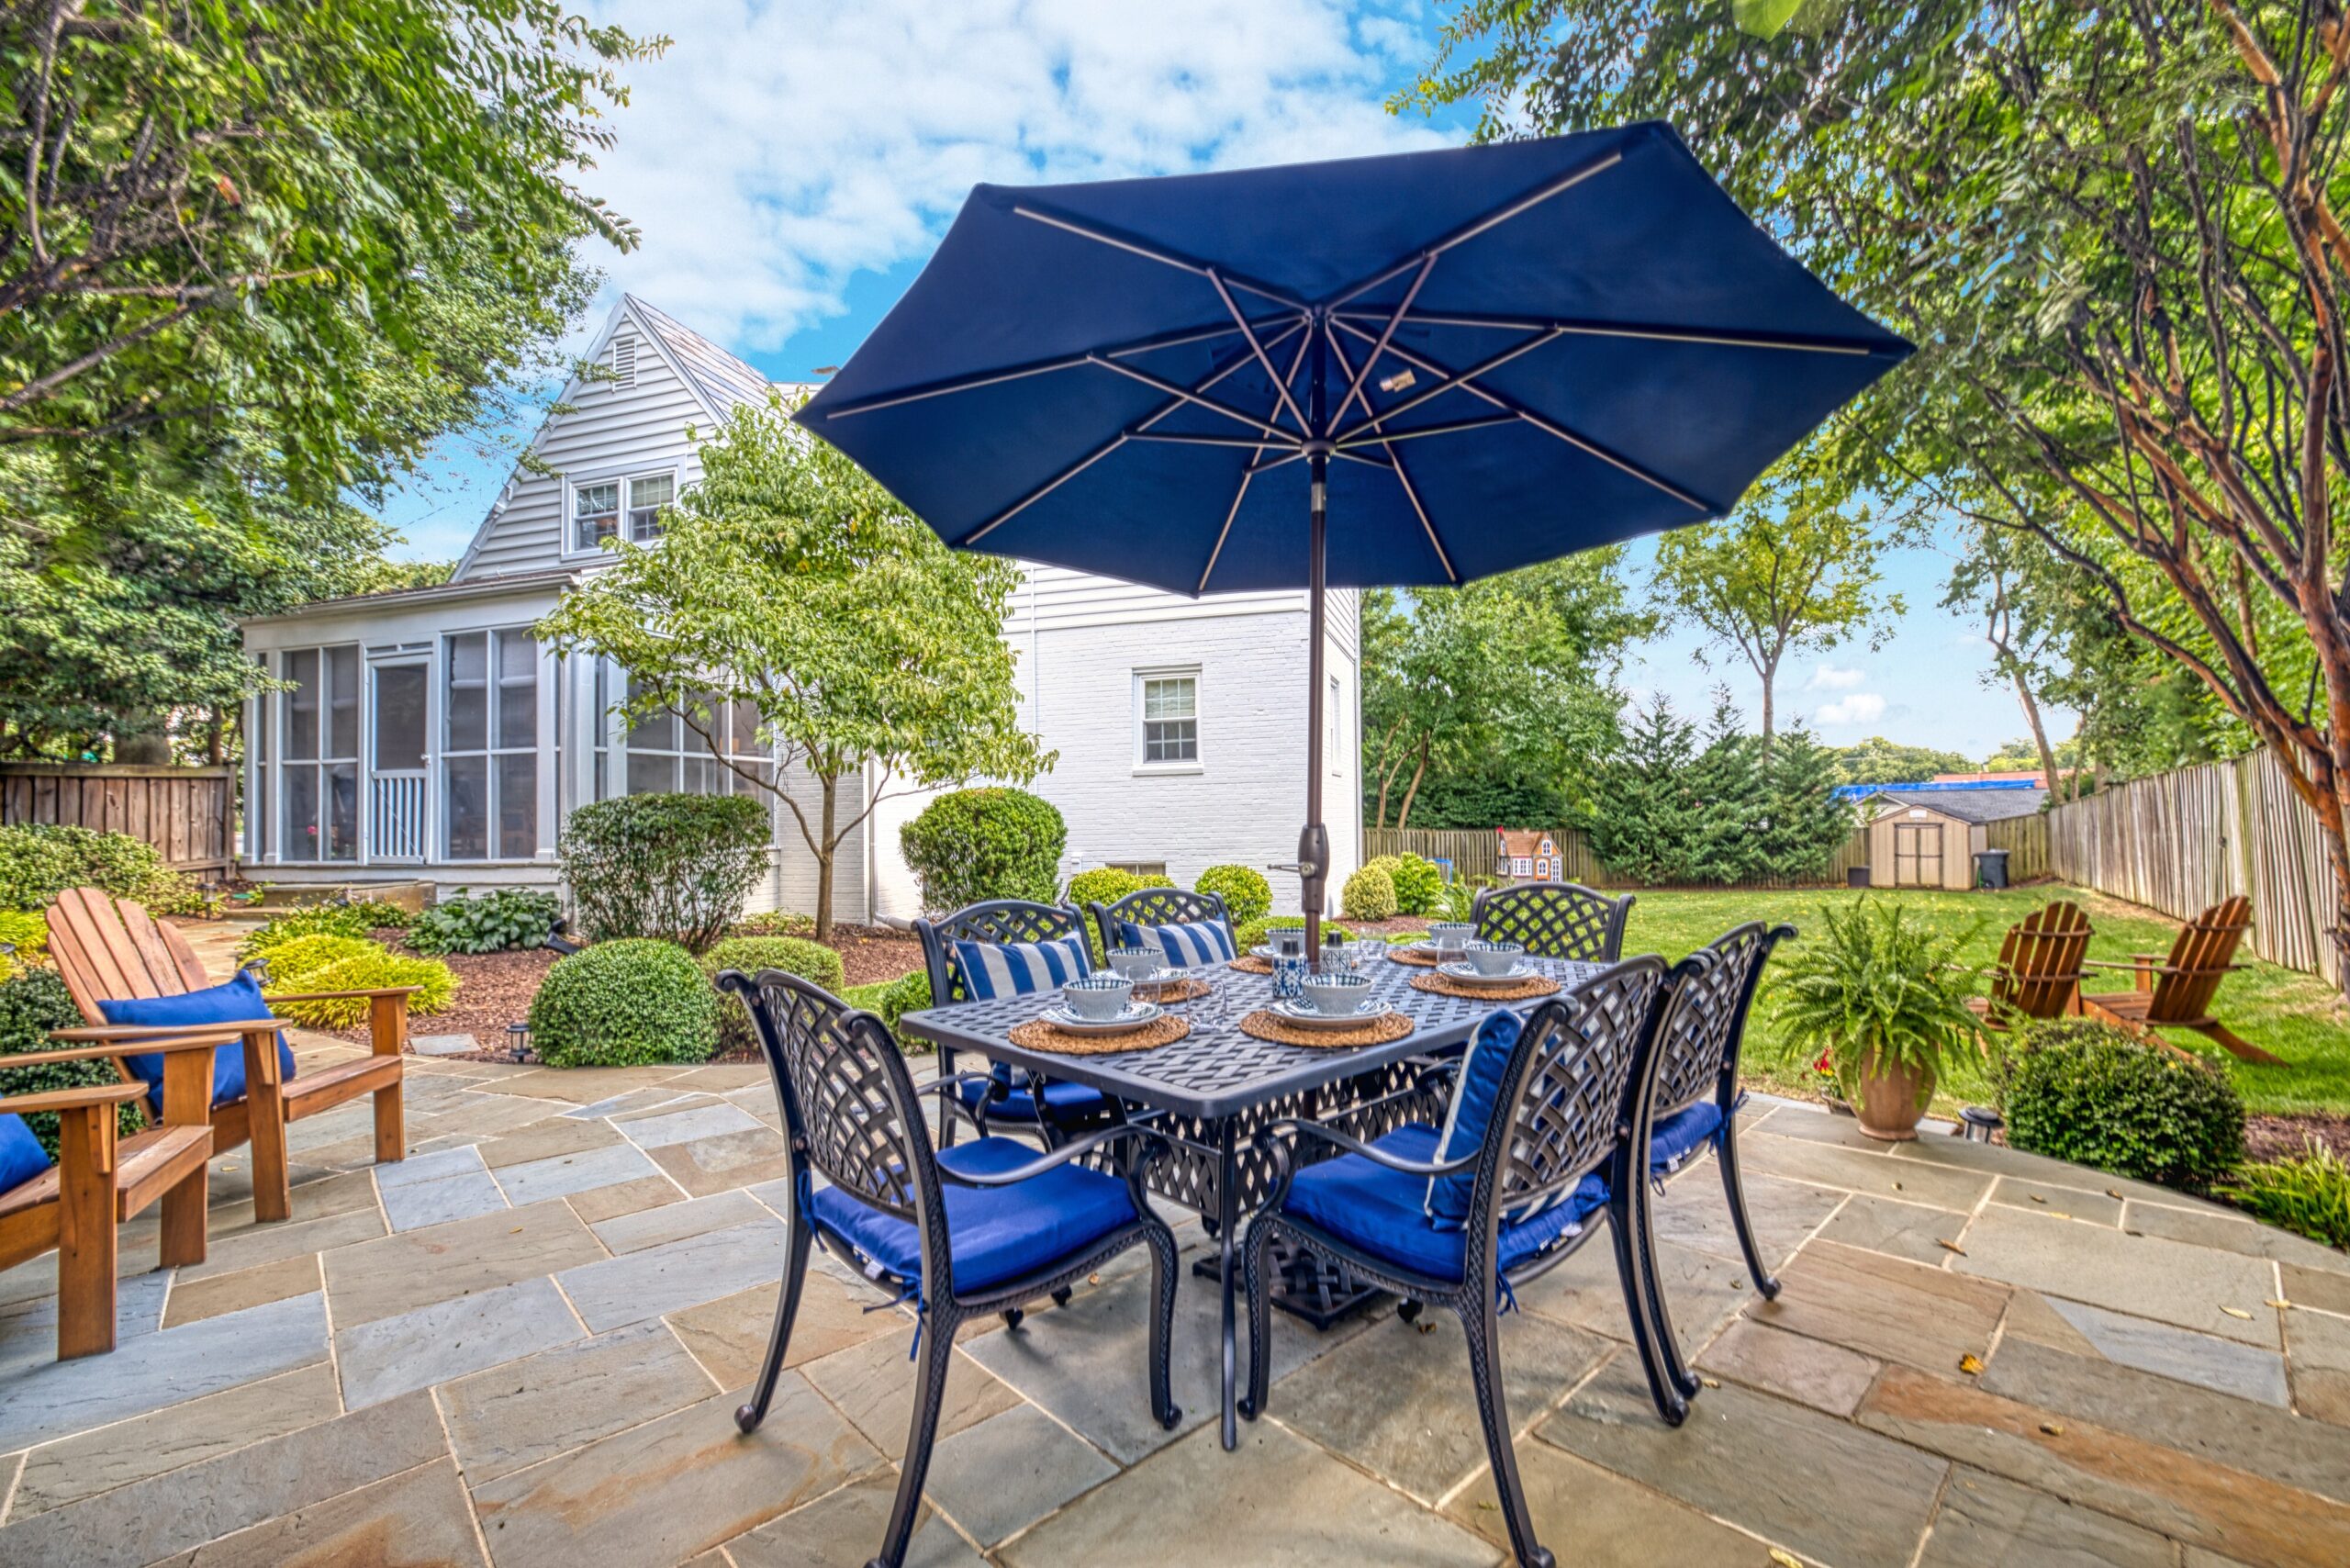 Exterior professional photo of stone patio behind 1946 Cape Cod home in Alexandria, VA with navy patio furniture